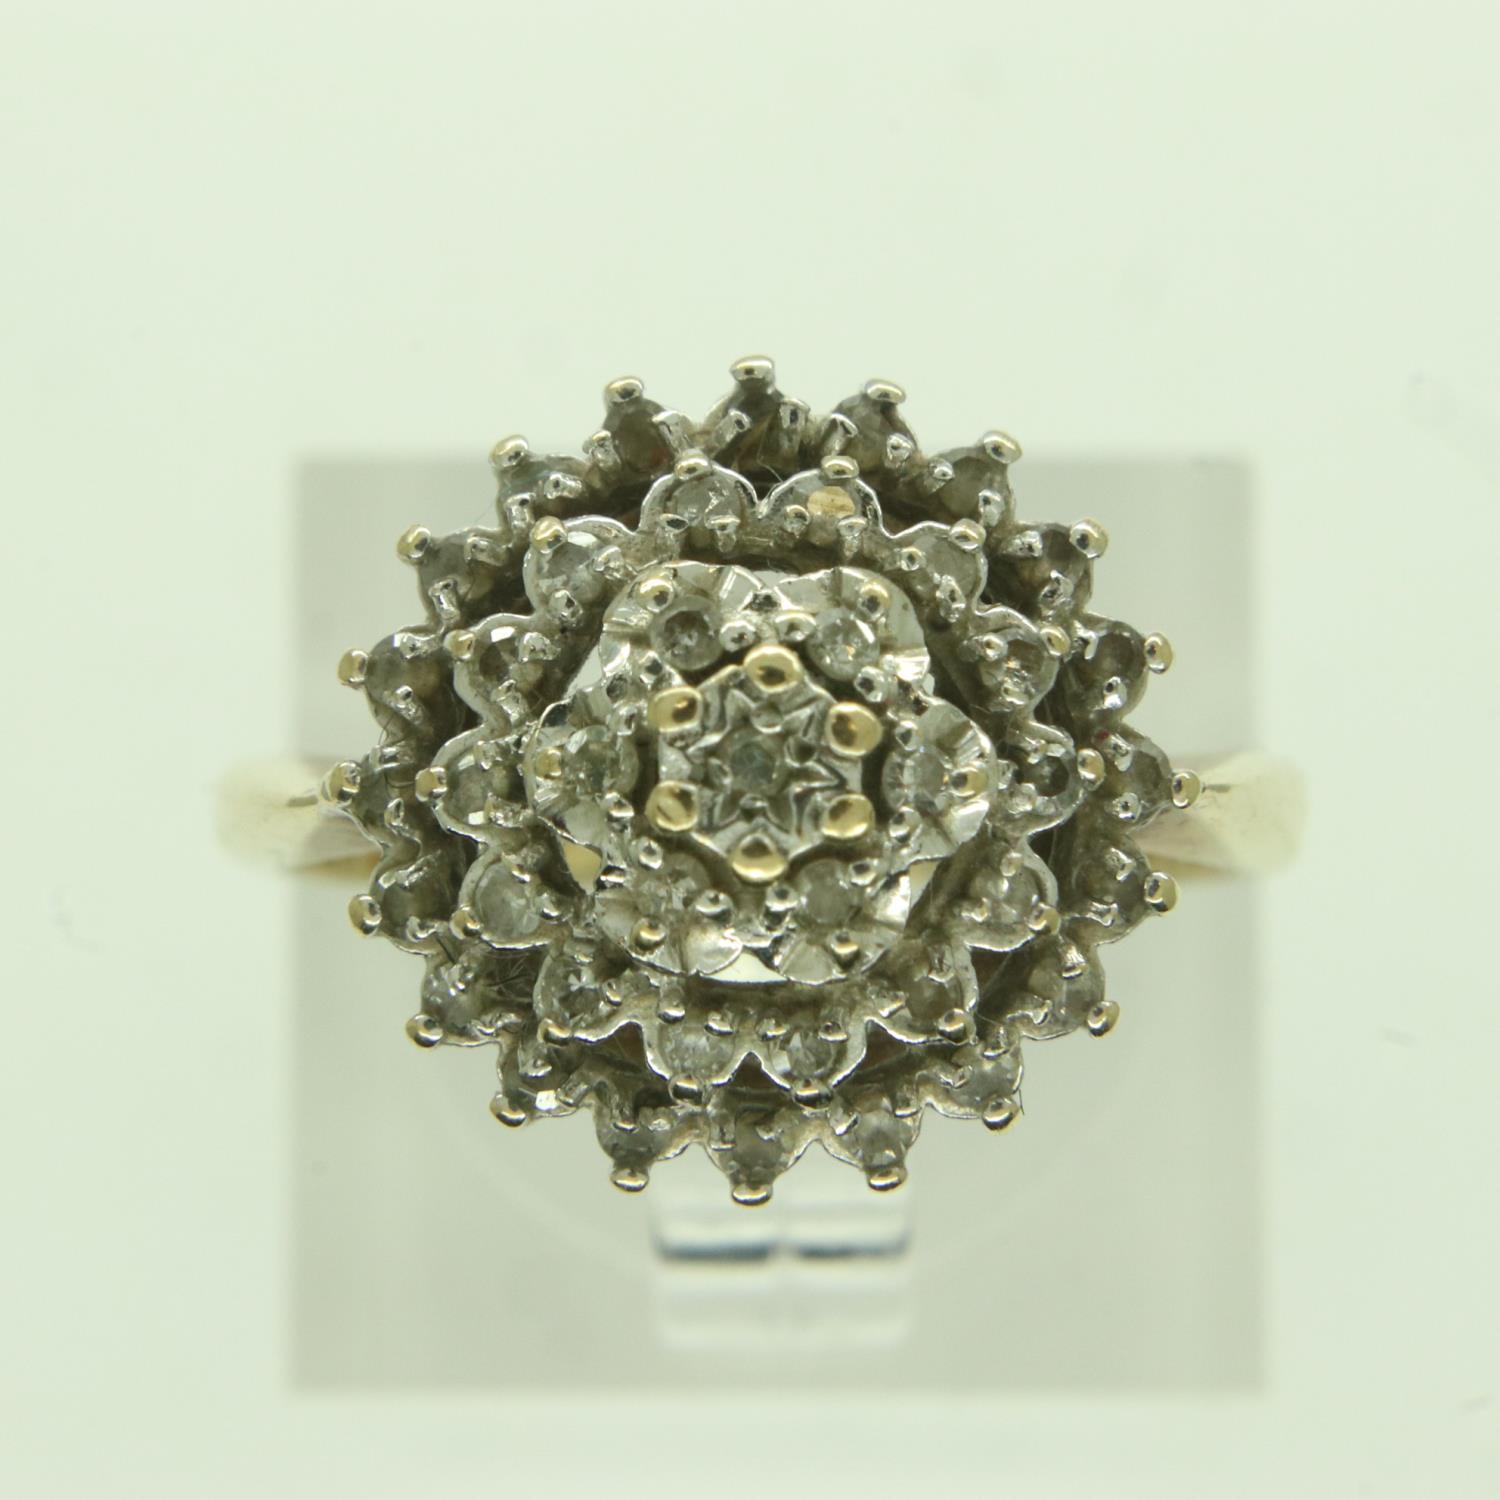 9ct gold diamond cluster ring, size L, 3.1g. UK P&P Group 0 (£6+VAT for the first lot and £1+VAT for